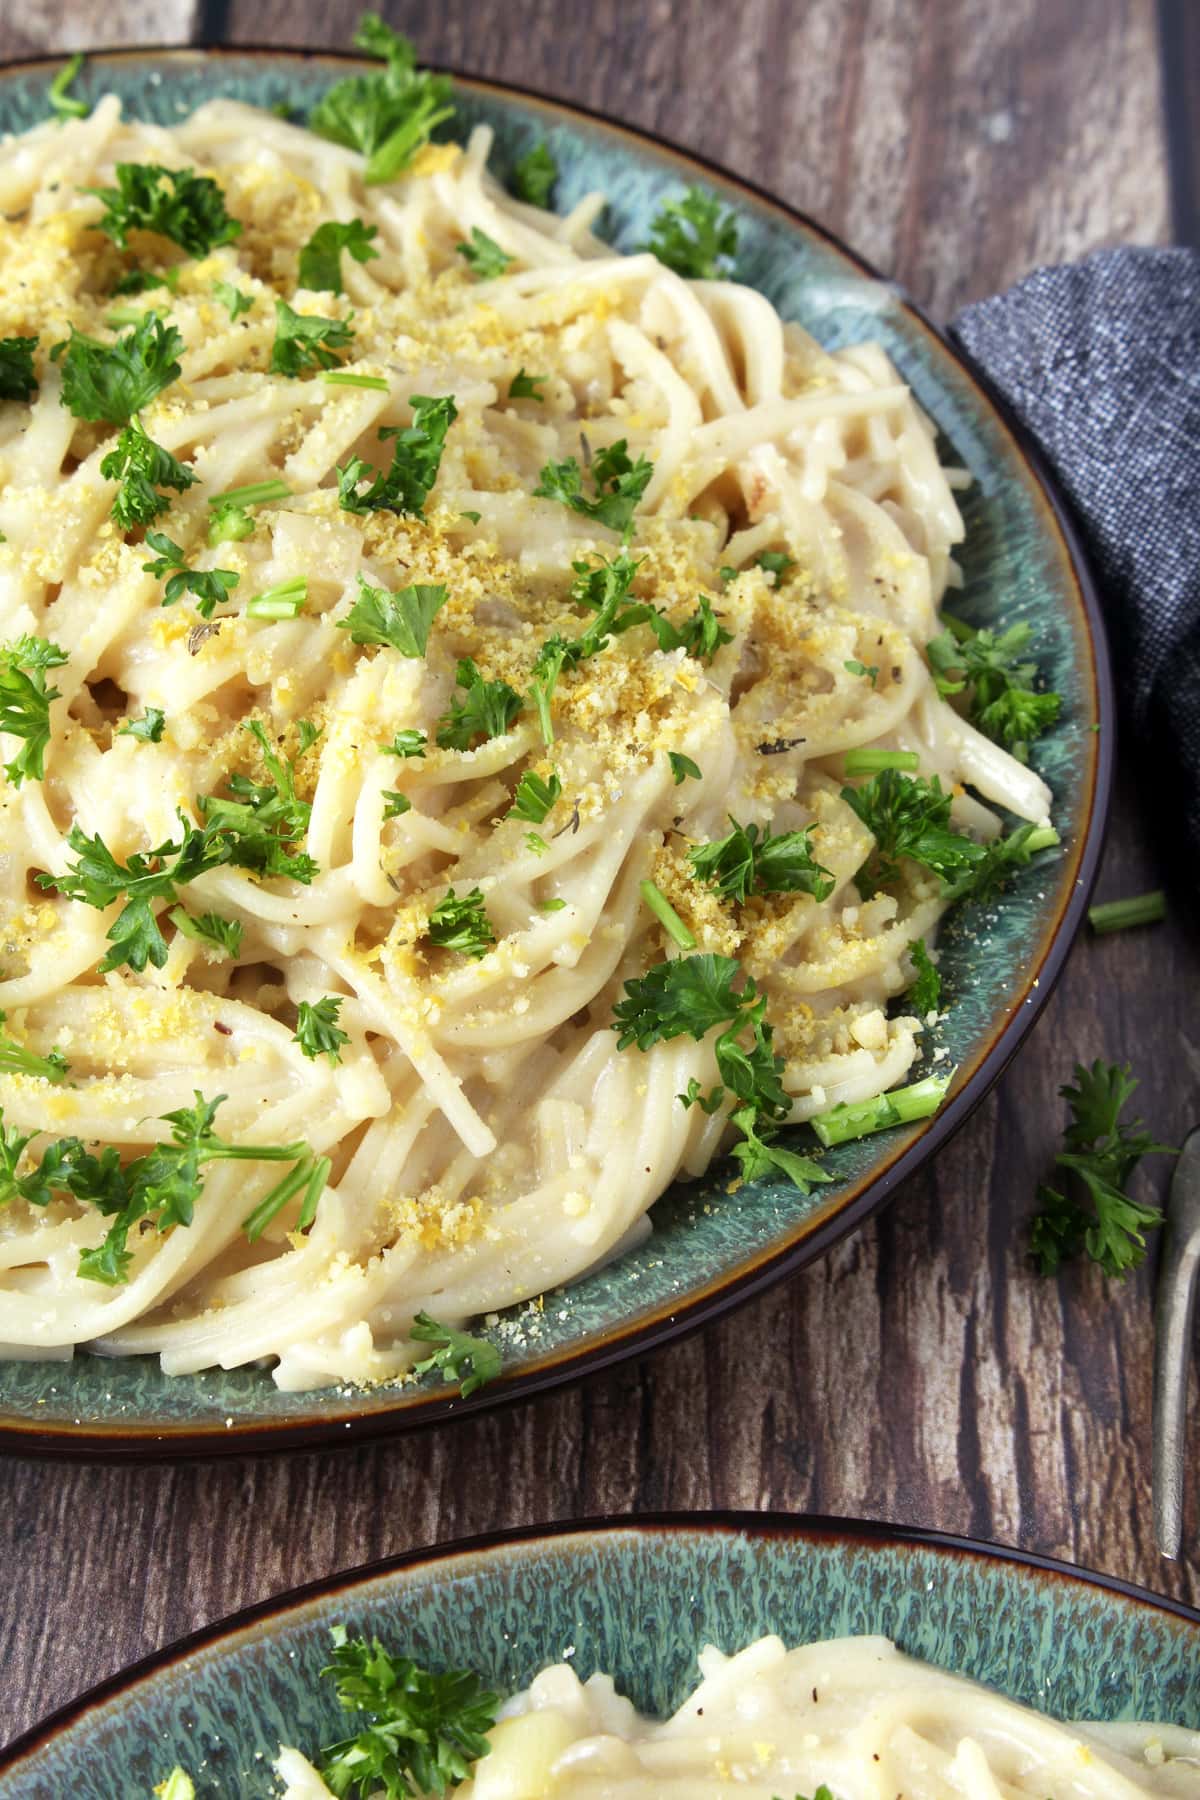 Transport yourself to a little corner of an Italian restaurant when you make these vegan alfredo noodles! Simple to make, you can enjoy an easy weeknight dinner. Just don't forget to talk like your name is Luigi and you have a mustache. Because IT'S FUN. #veganalfredosaucenutfree #veganalfredopasta #veganweeknightmeals #veganweeknightdinners #easyveganrecipes #easyvegandinner #bohemianvegankitchen